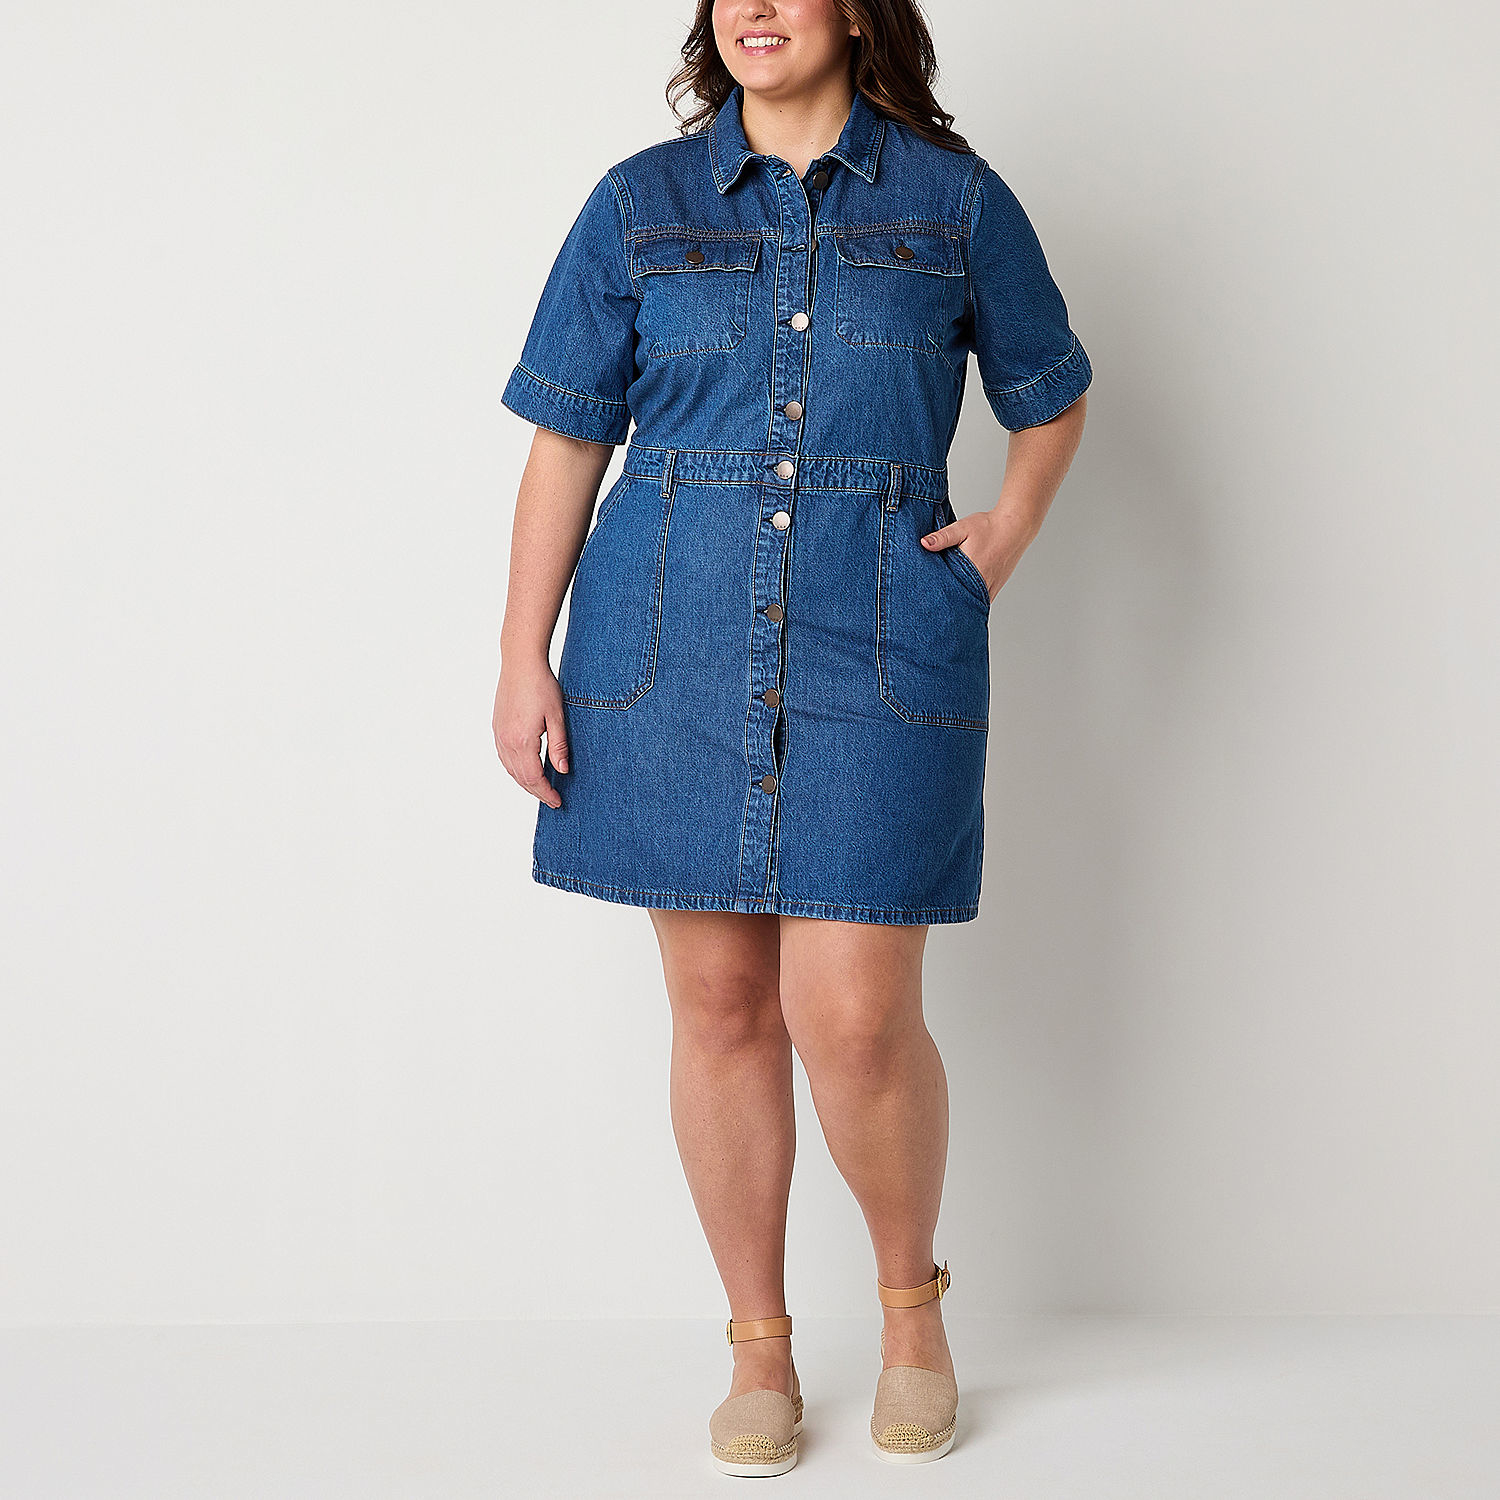 Woman in a collared denim dress with buttons and pockets, suitable for plus-size fashion options